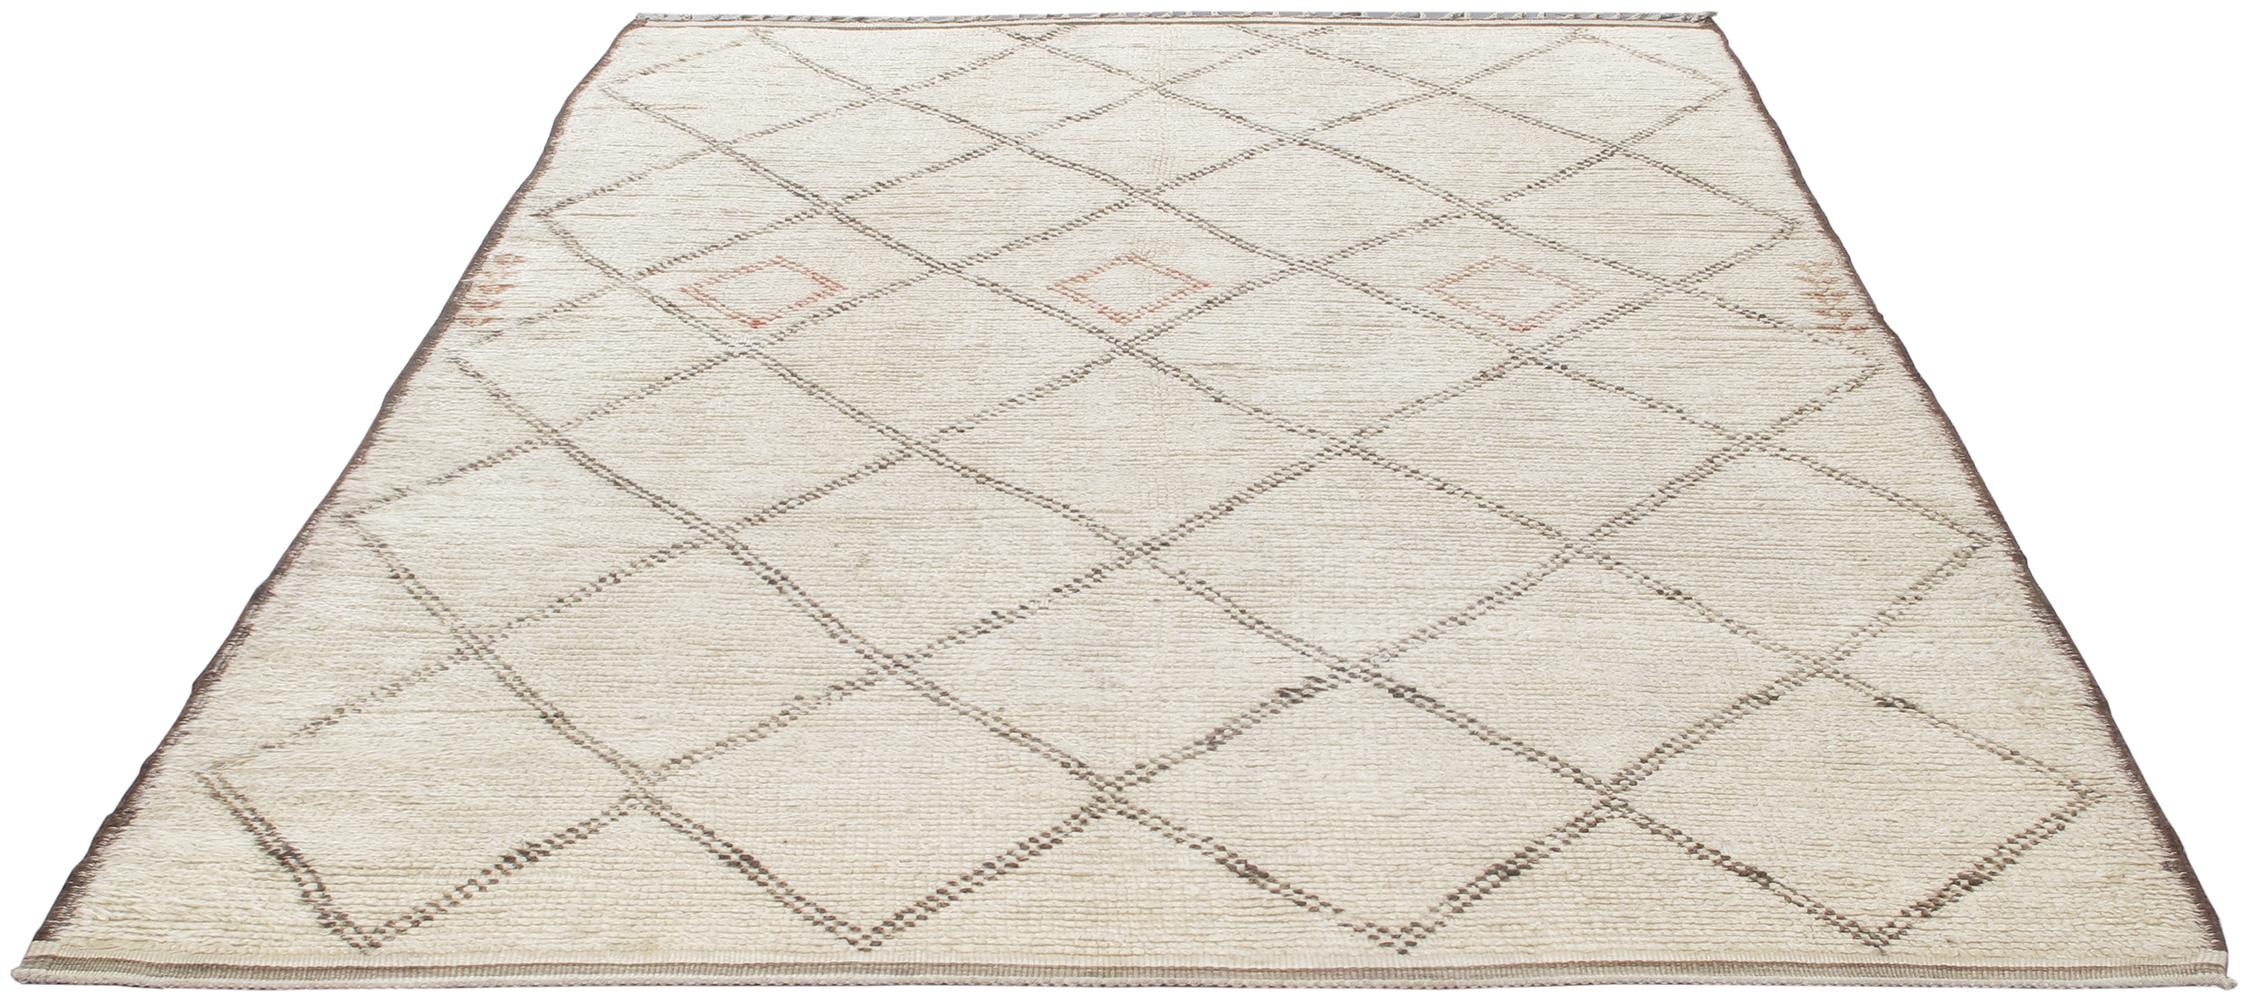 Hand-Knotted Vintage Beni Ourain Berber Tribal Moroccan Rug For Sale